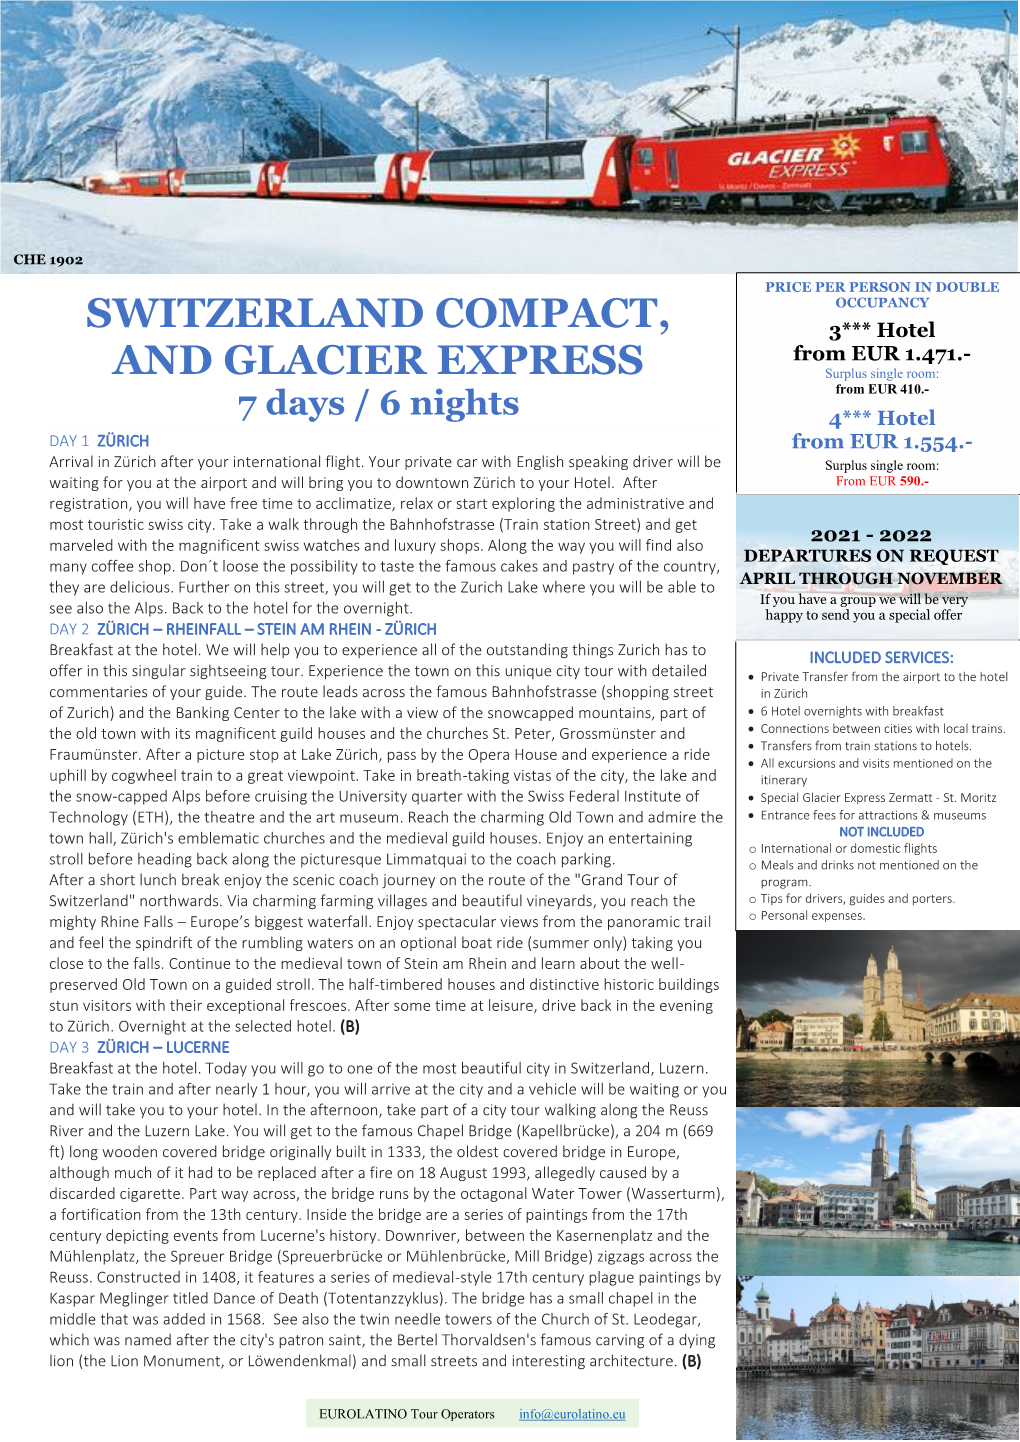 Switzerland Compact, and Glacier Express